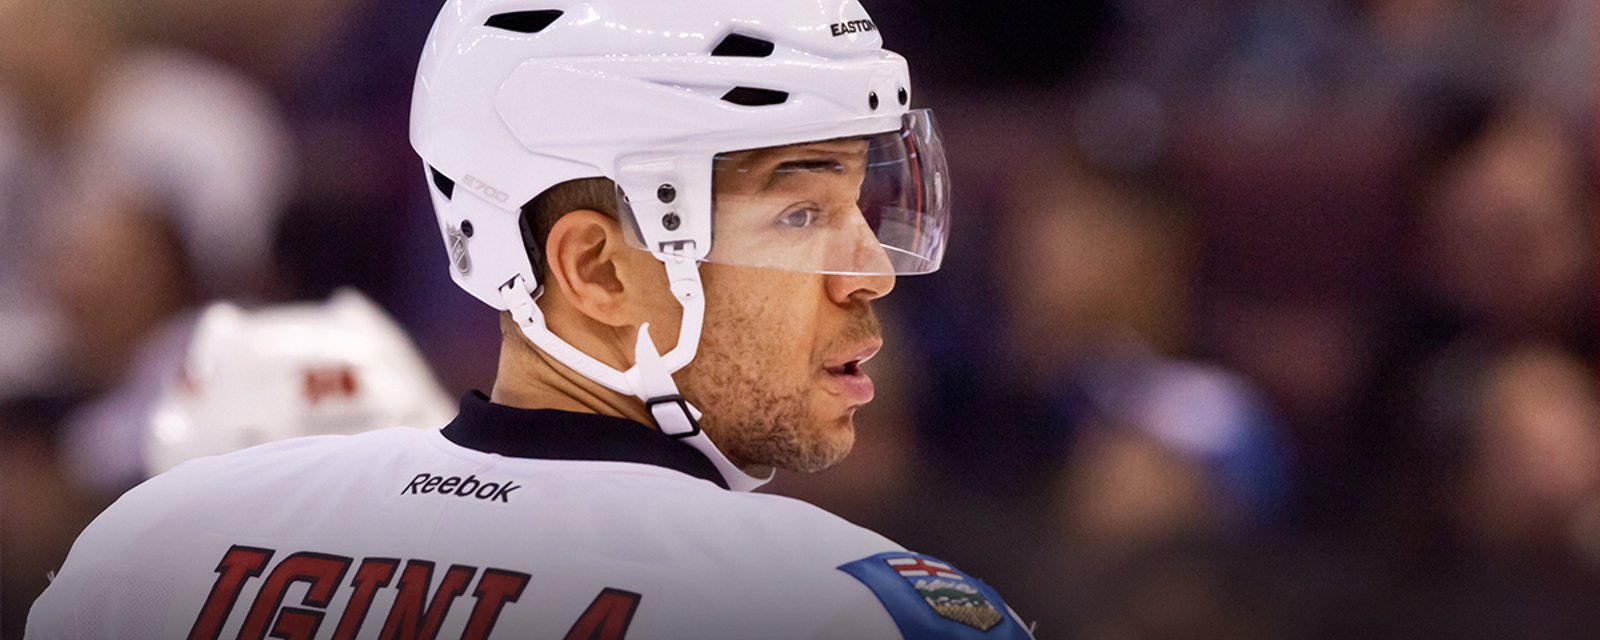 Report: NHL team offers Iginla a contract